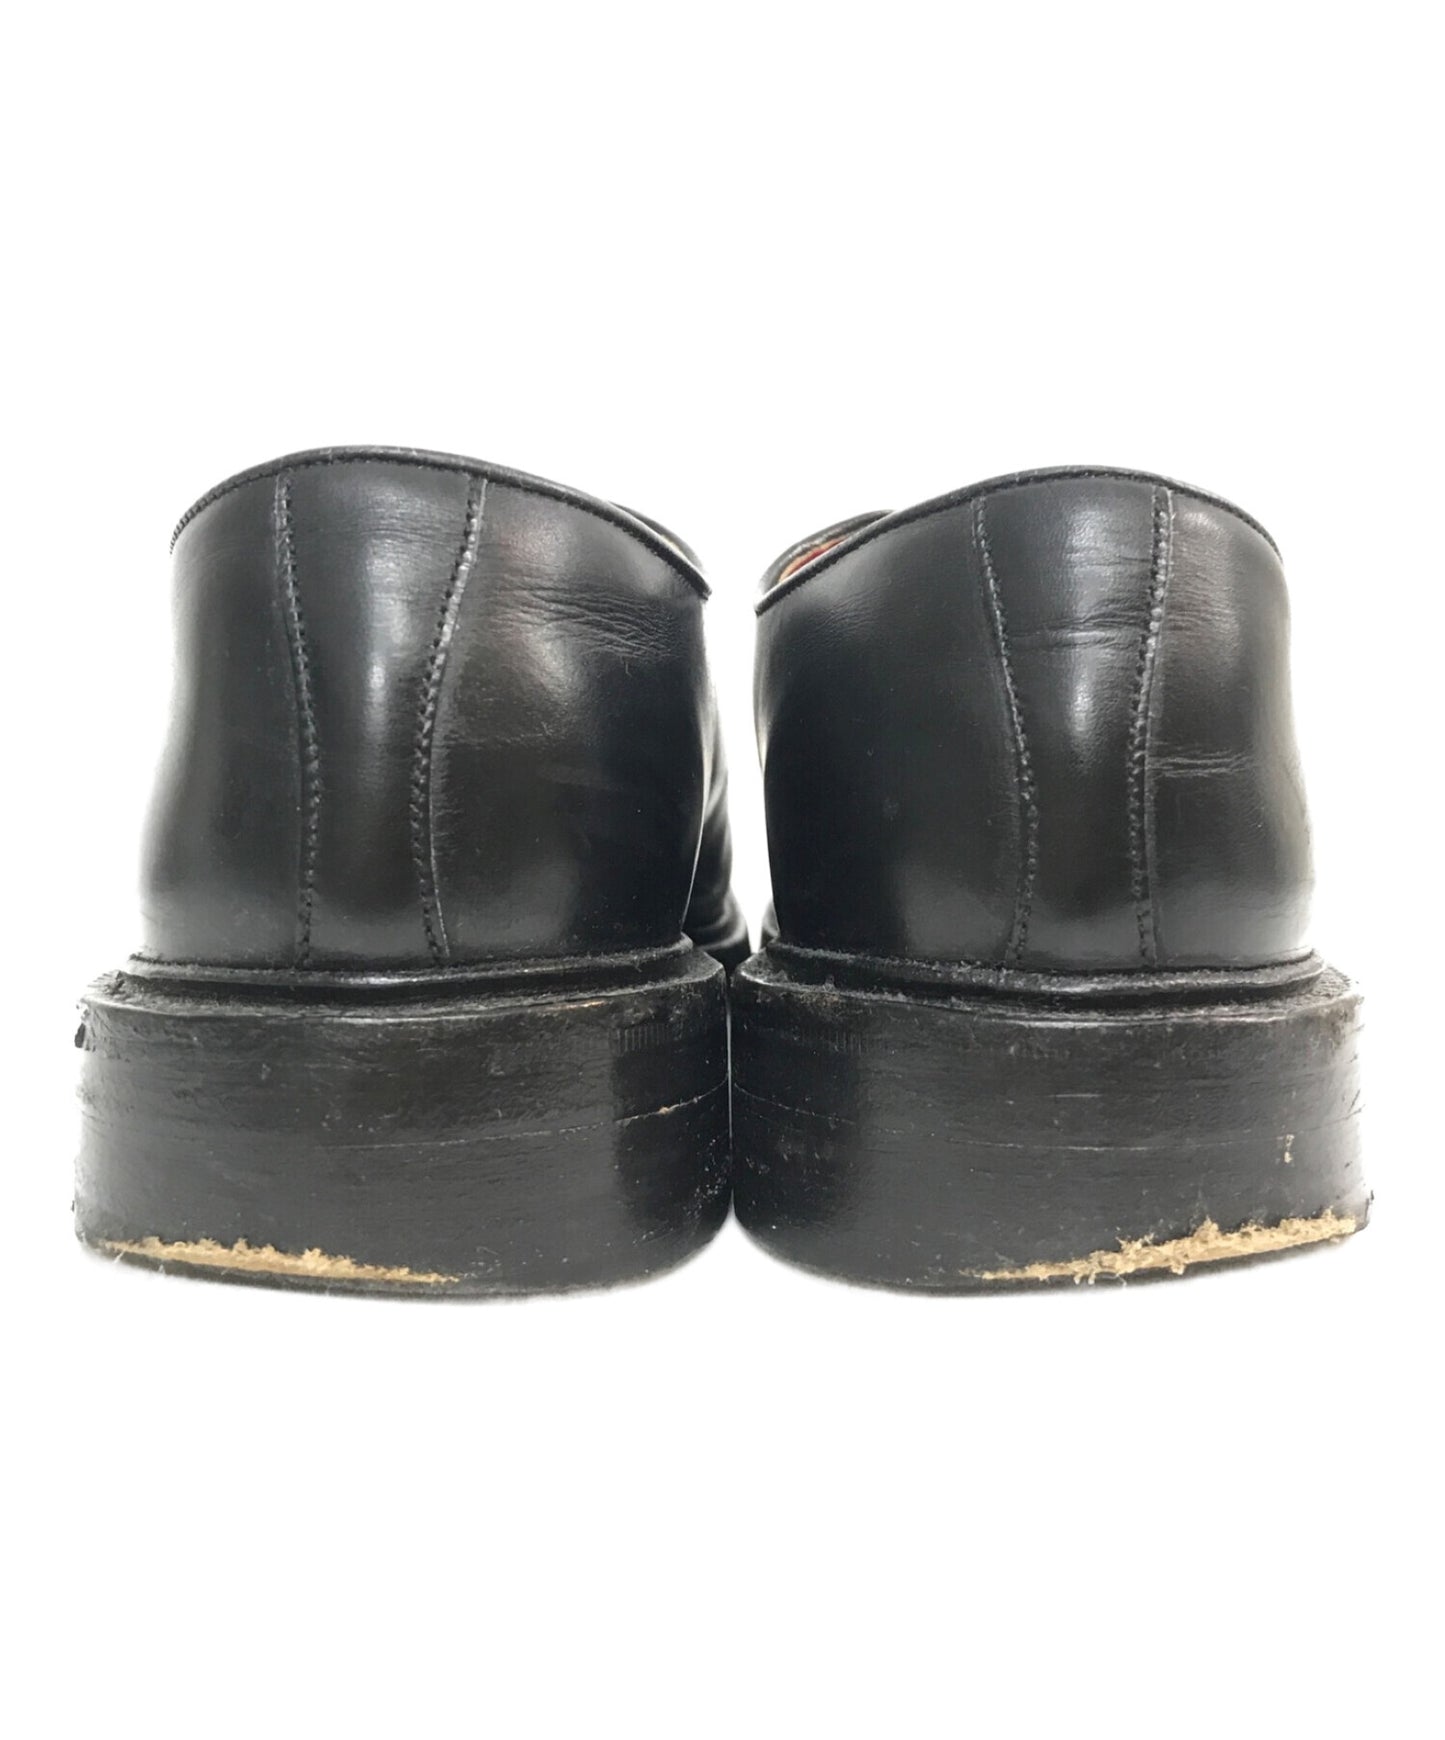 [Pre-owned] COMME des GARCONS JUNYA WATANABE MAN Leather shoes / Plain toe shoes / Collaboration model